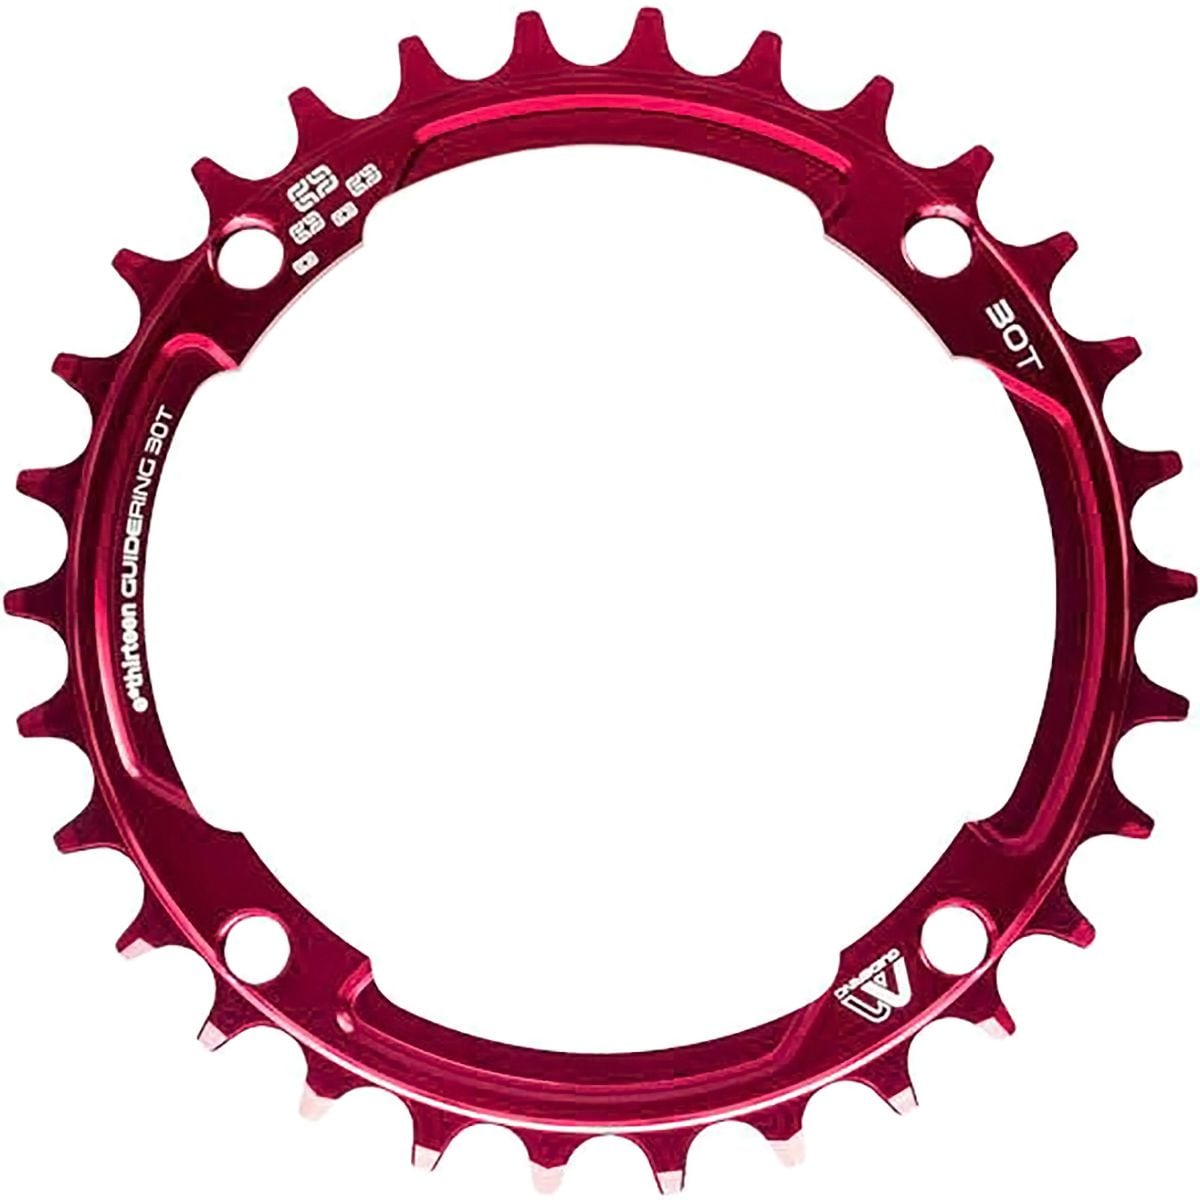 e*thirteen components Guidering 4 Bolt Chainring